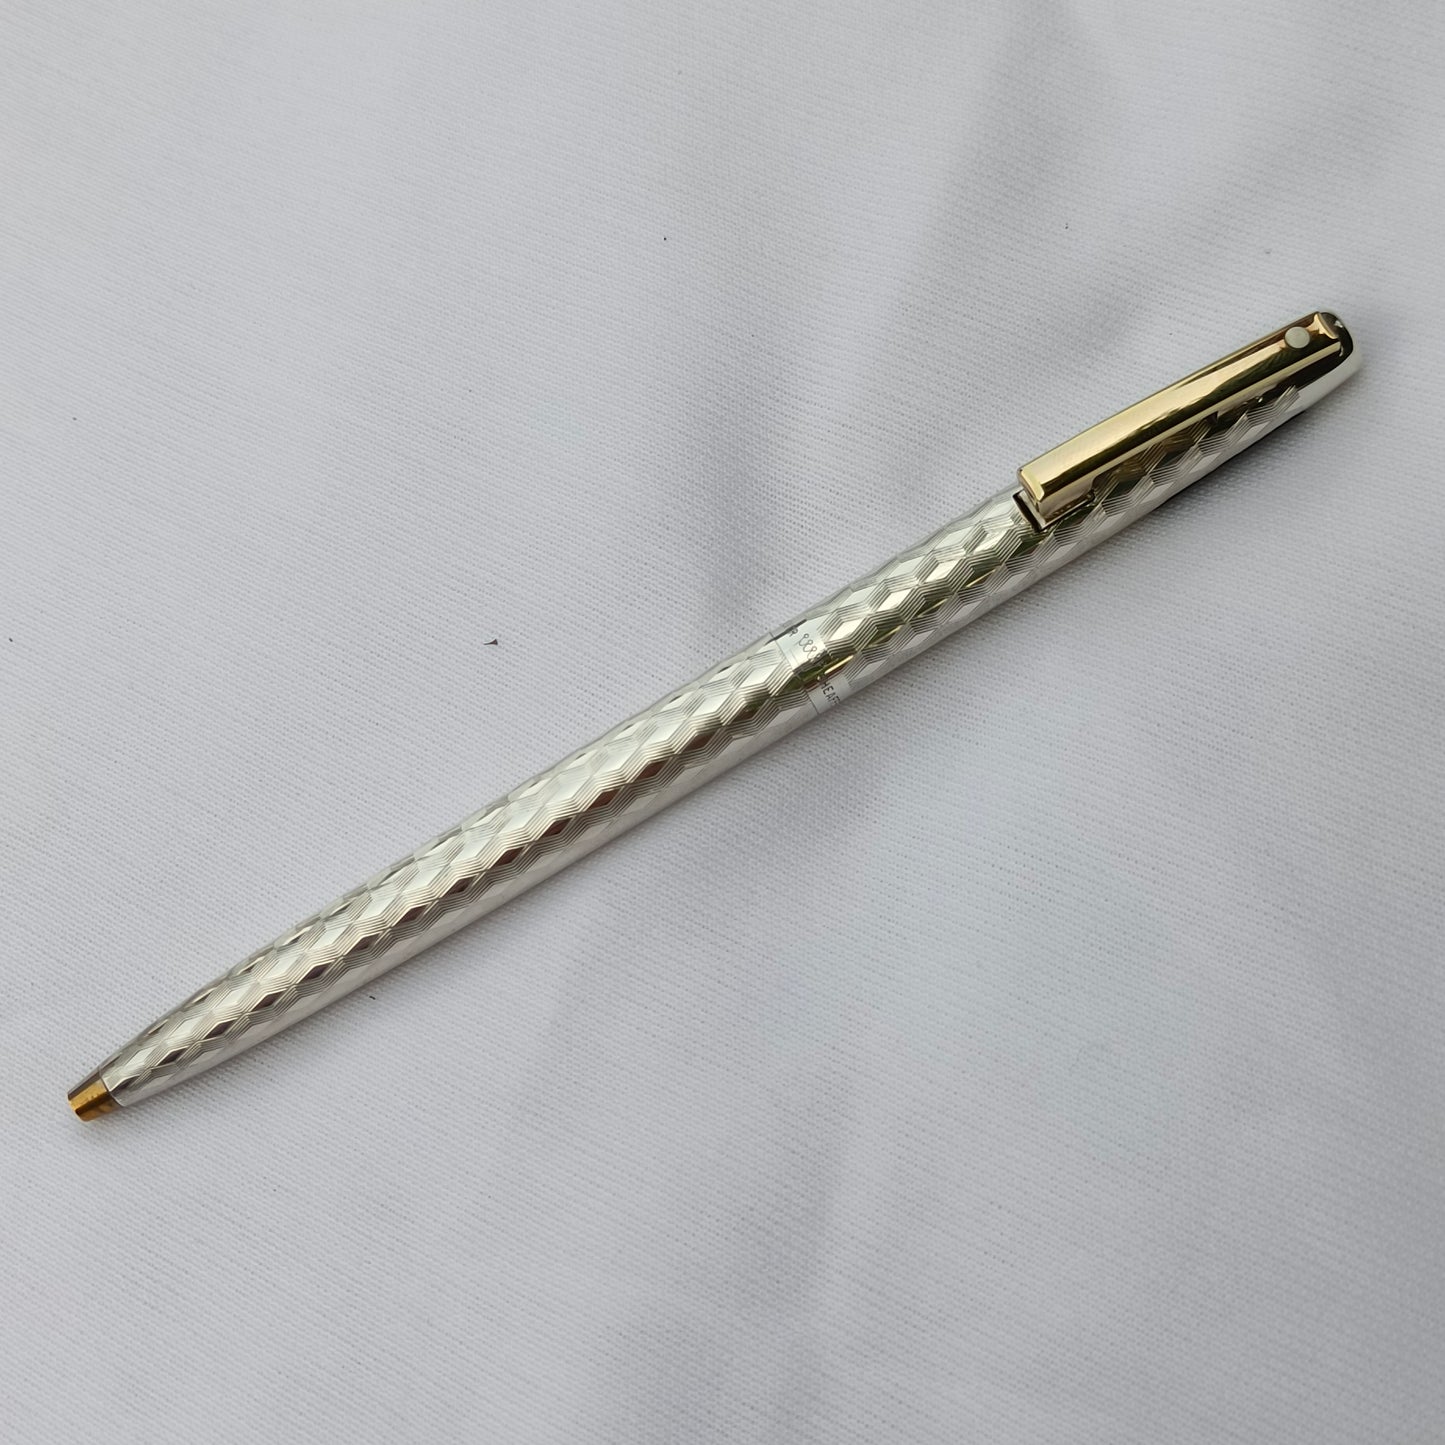 Sheaffer Imperial 834 Sterling Silver Ball Point Pen, USA